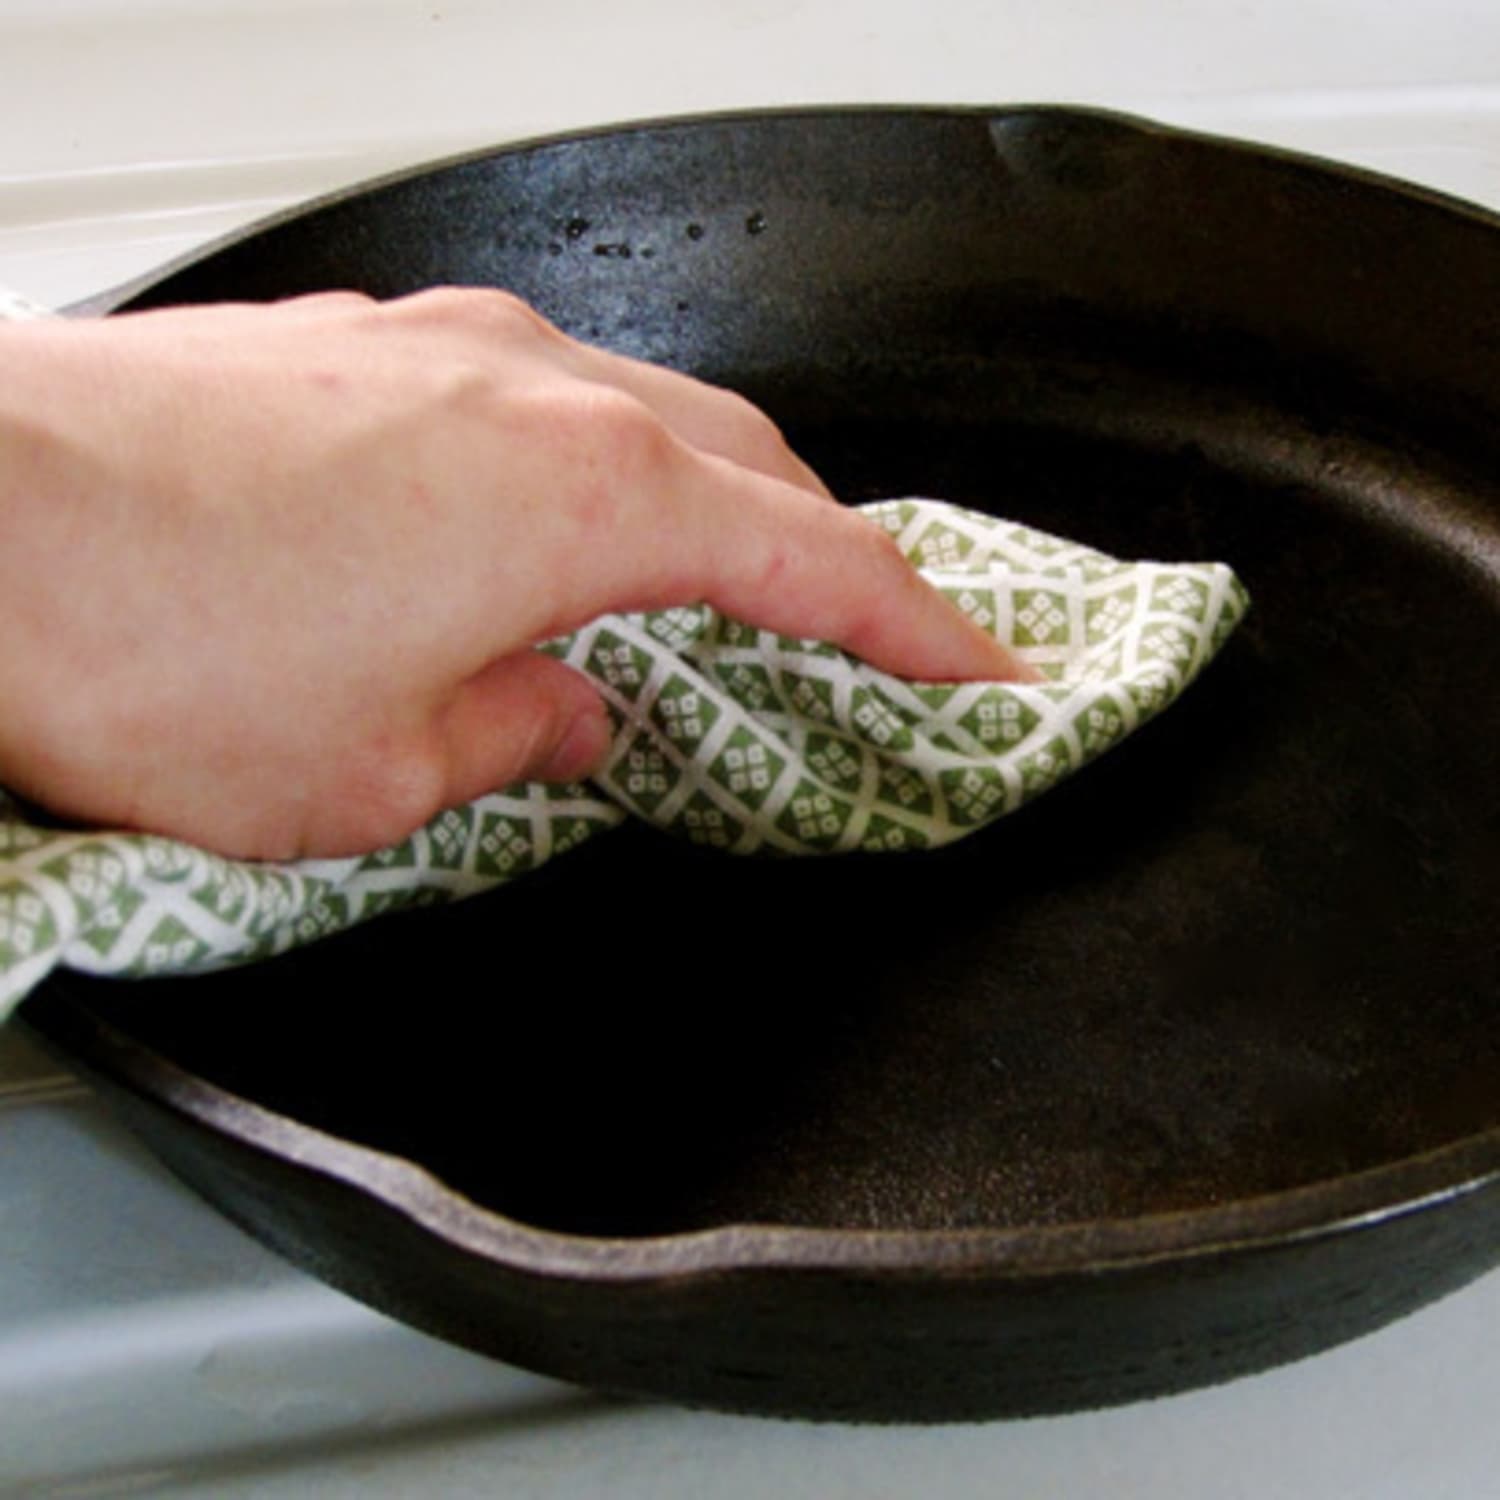 Using and Seasoning Cast Iron Pans - Countryside